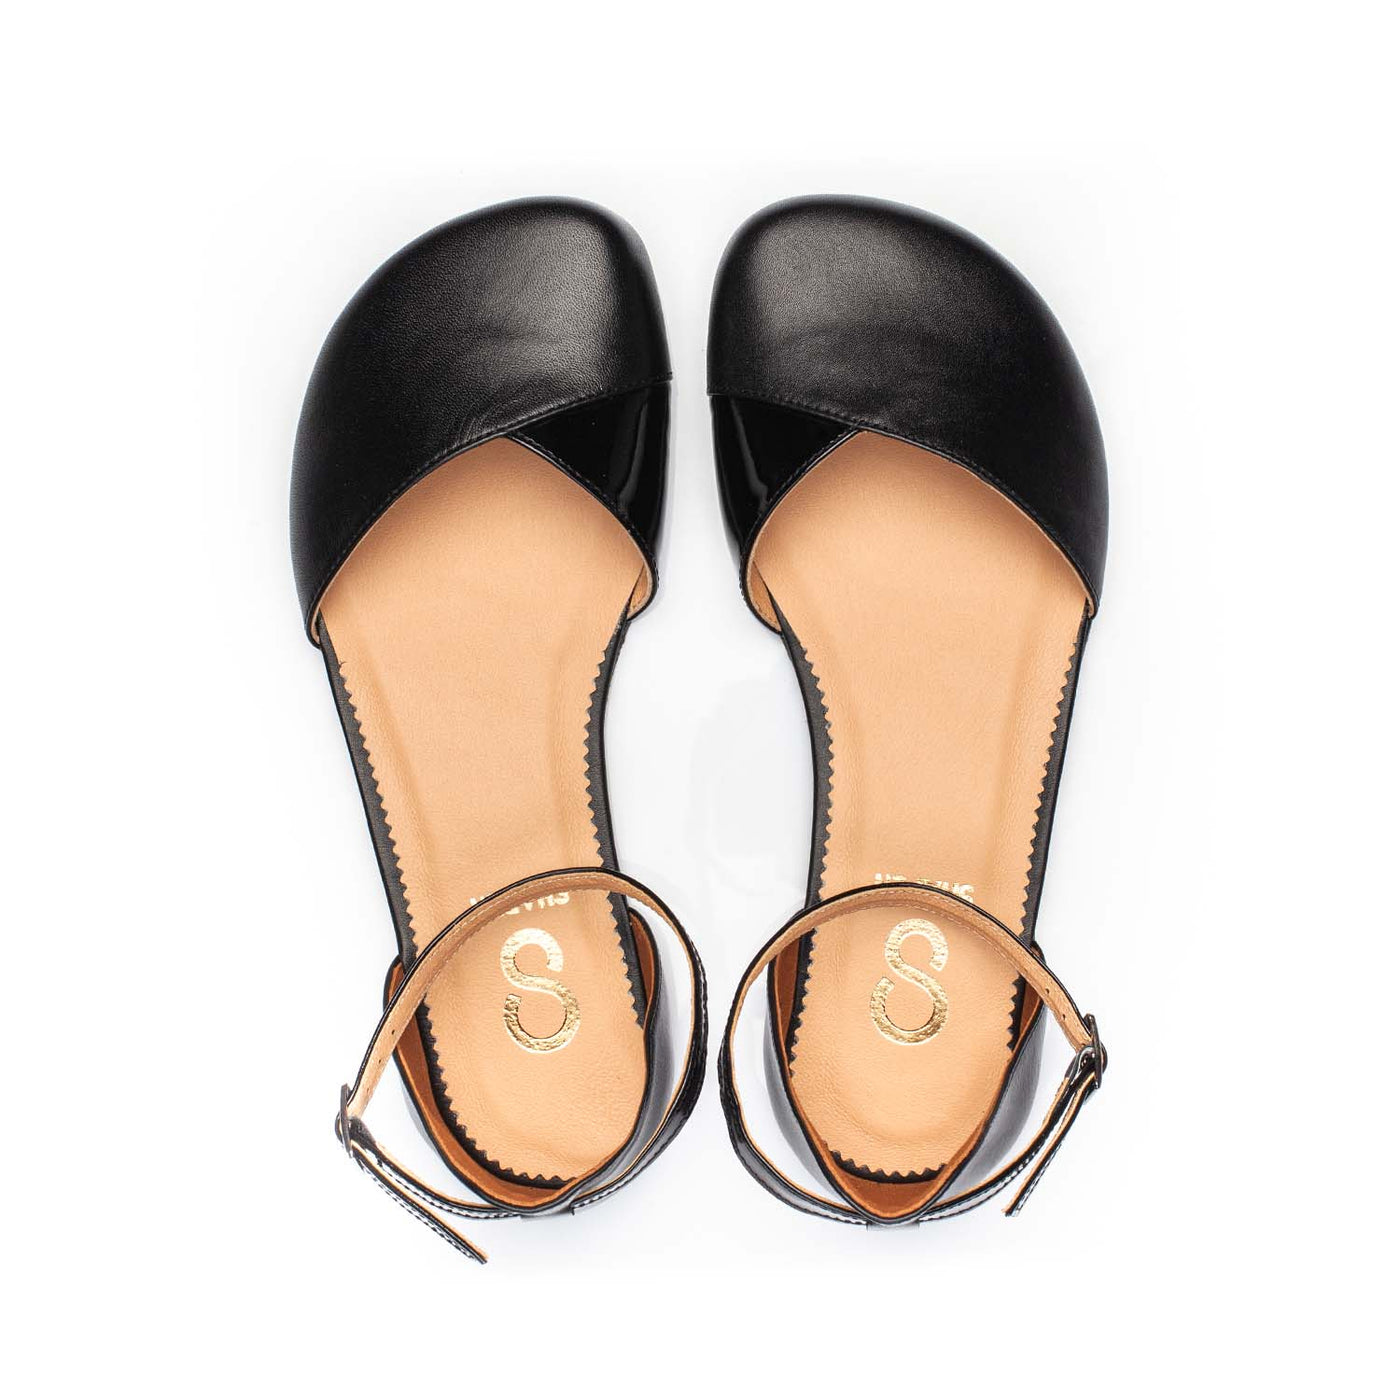 A photo of Shapen Poppy D’orsay dressy flats with a leather upper and rubber soles. The flats are a black color with a heel cup and dainty ankle strap, the inside of the sole are a beige color. Both flats are shown from the top facing up against a white background. #color_black